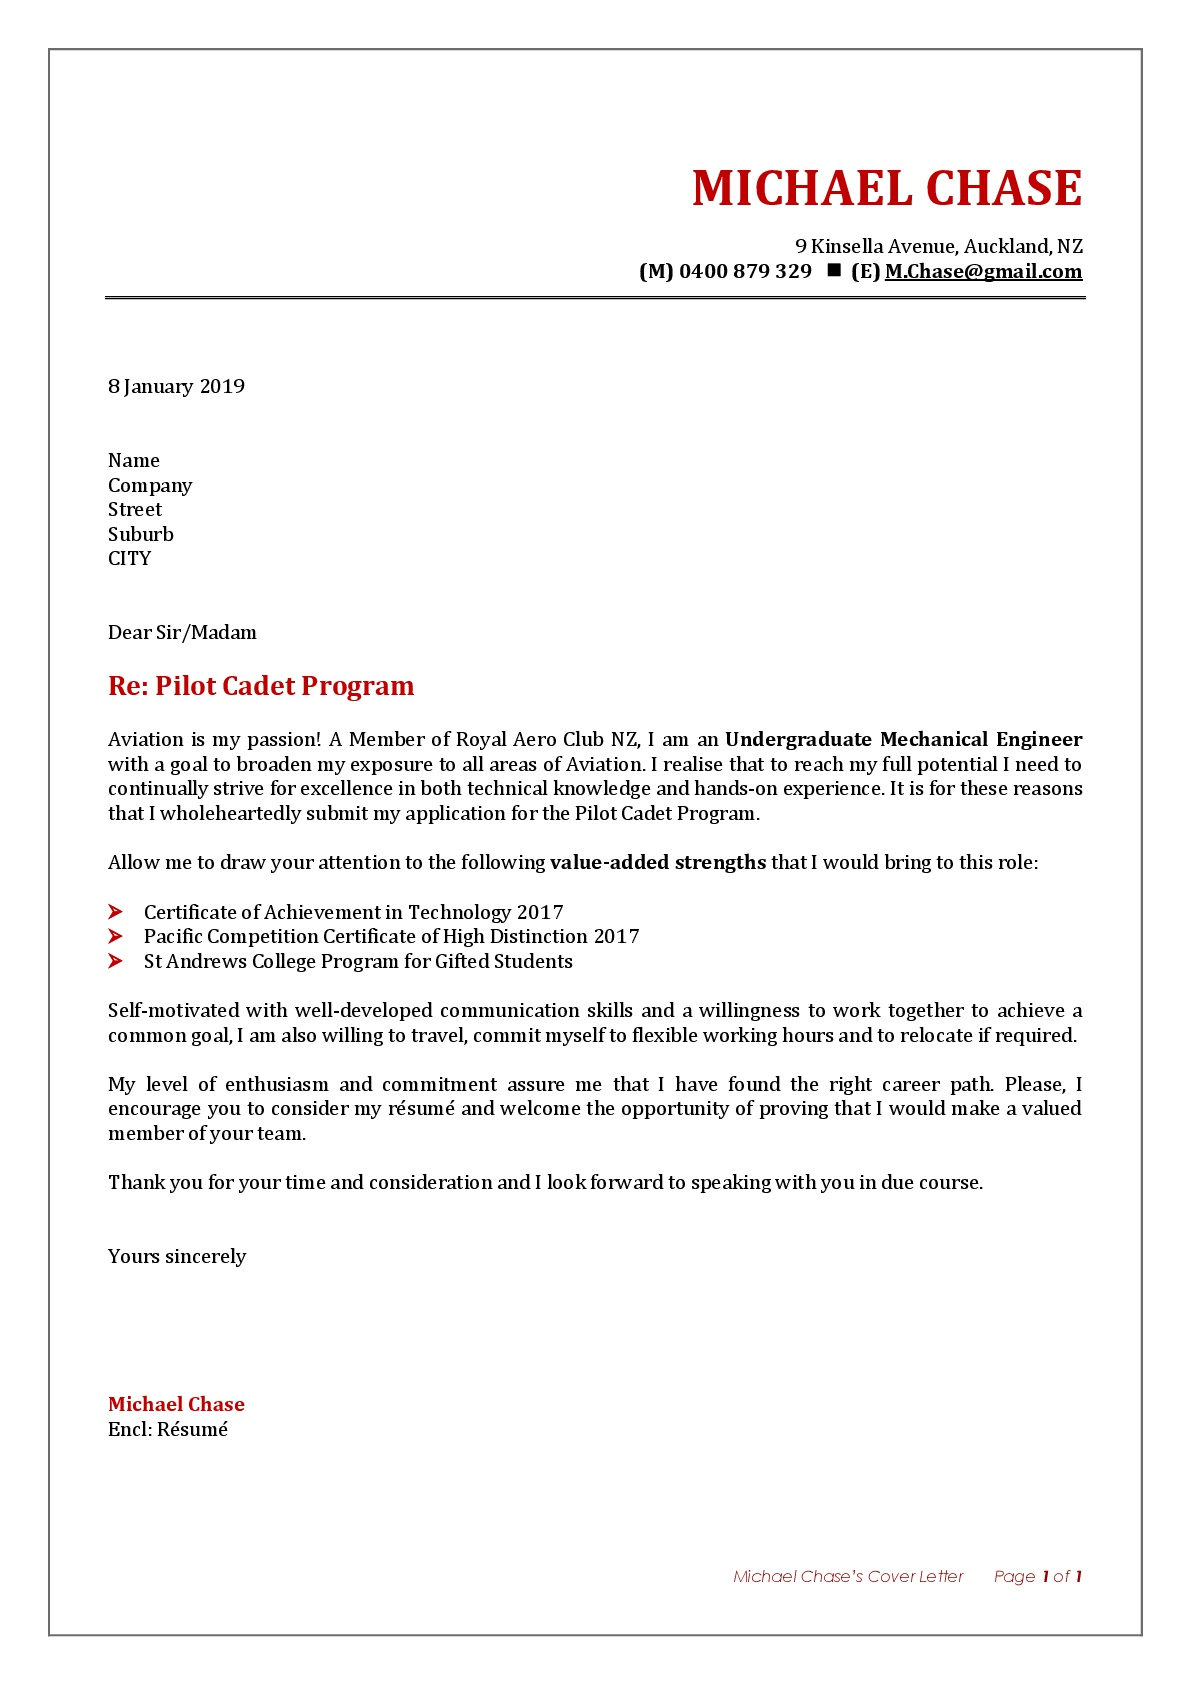 Resume Cover Letter Template – Write A Letter That Opens Doors With Material Letters Template